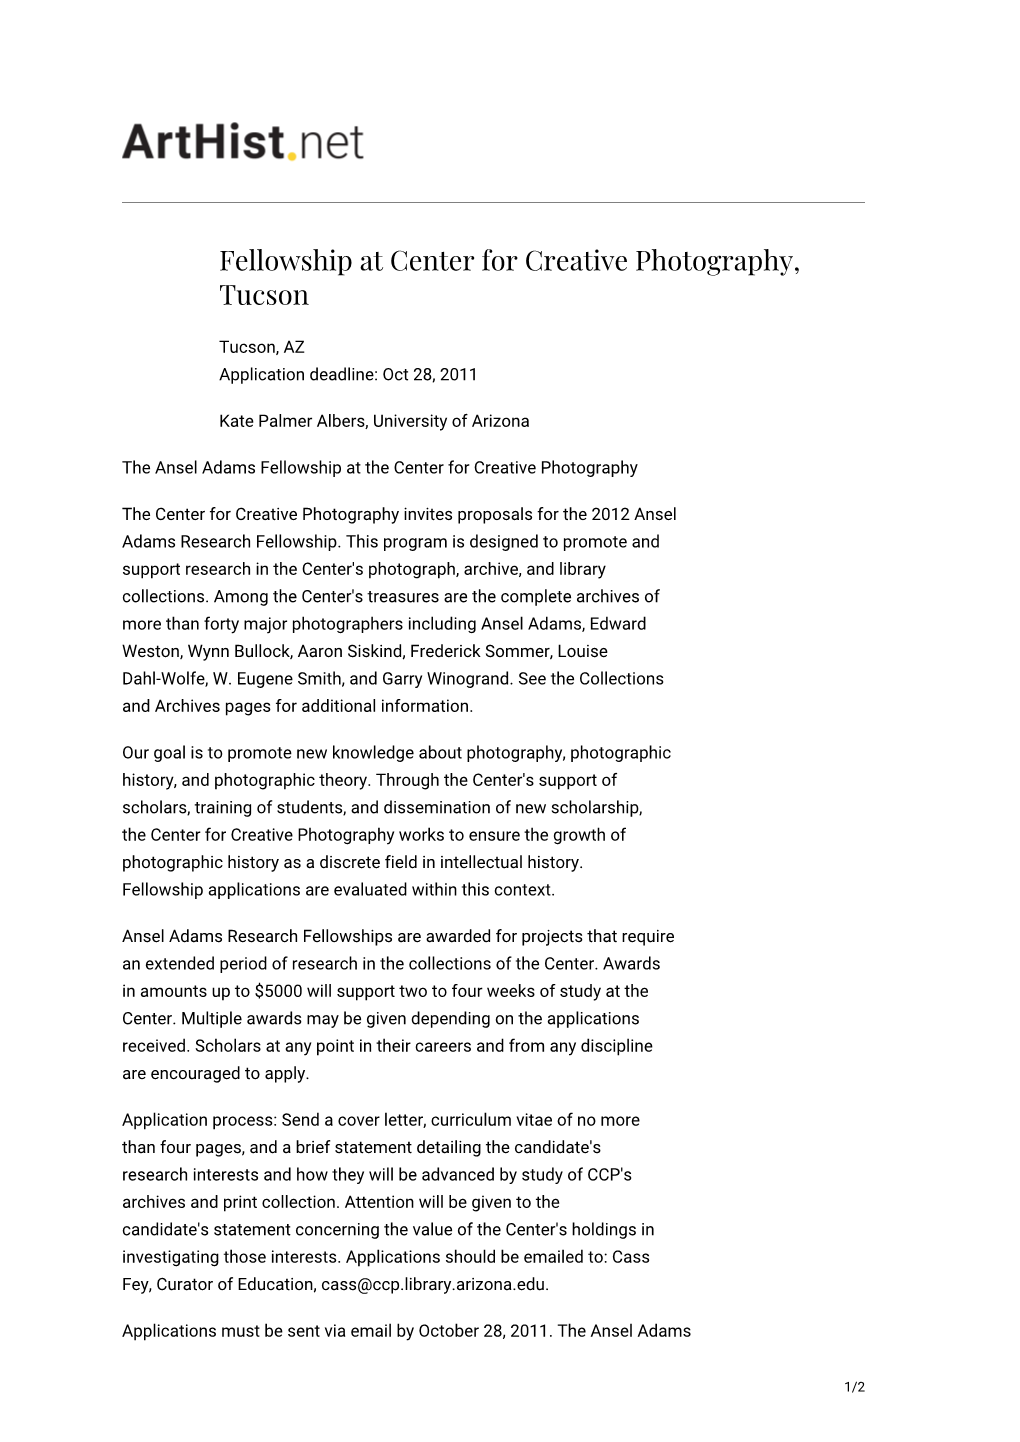 Fellowship at Center for Creative Photography, Tucson